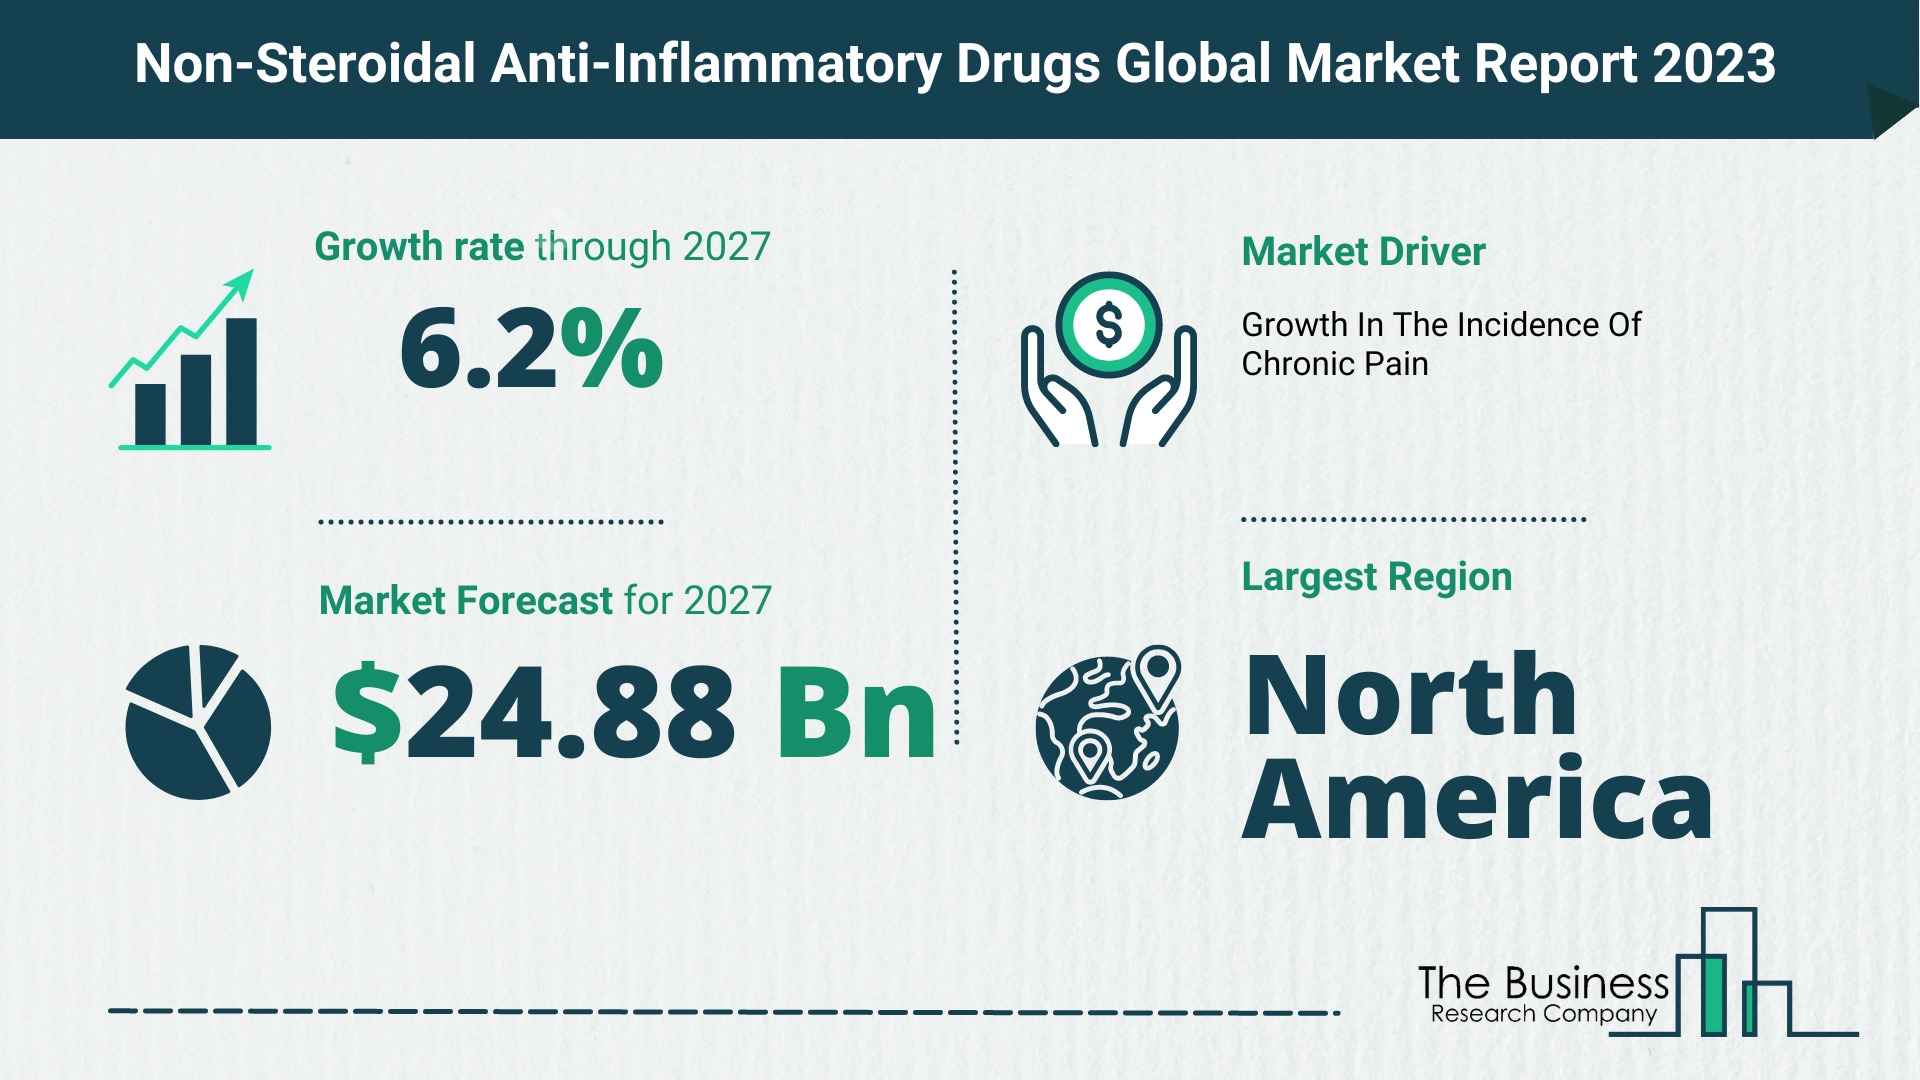 Non-Steroidal Anti-Inflammatory Drugs Market Size, Share, And Growth Rate Analysis 2023